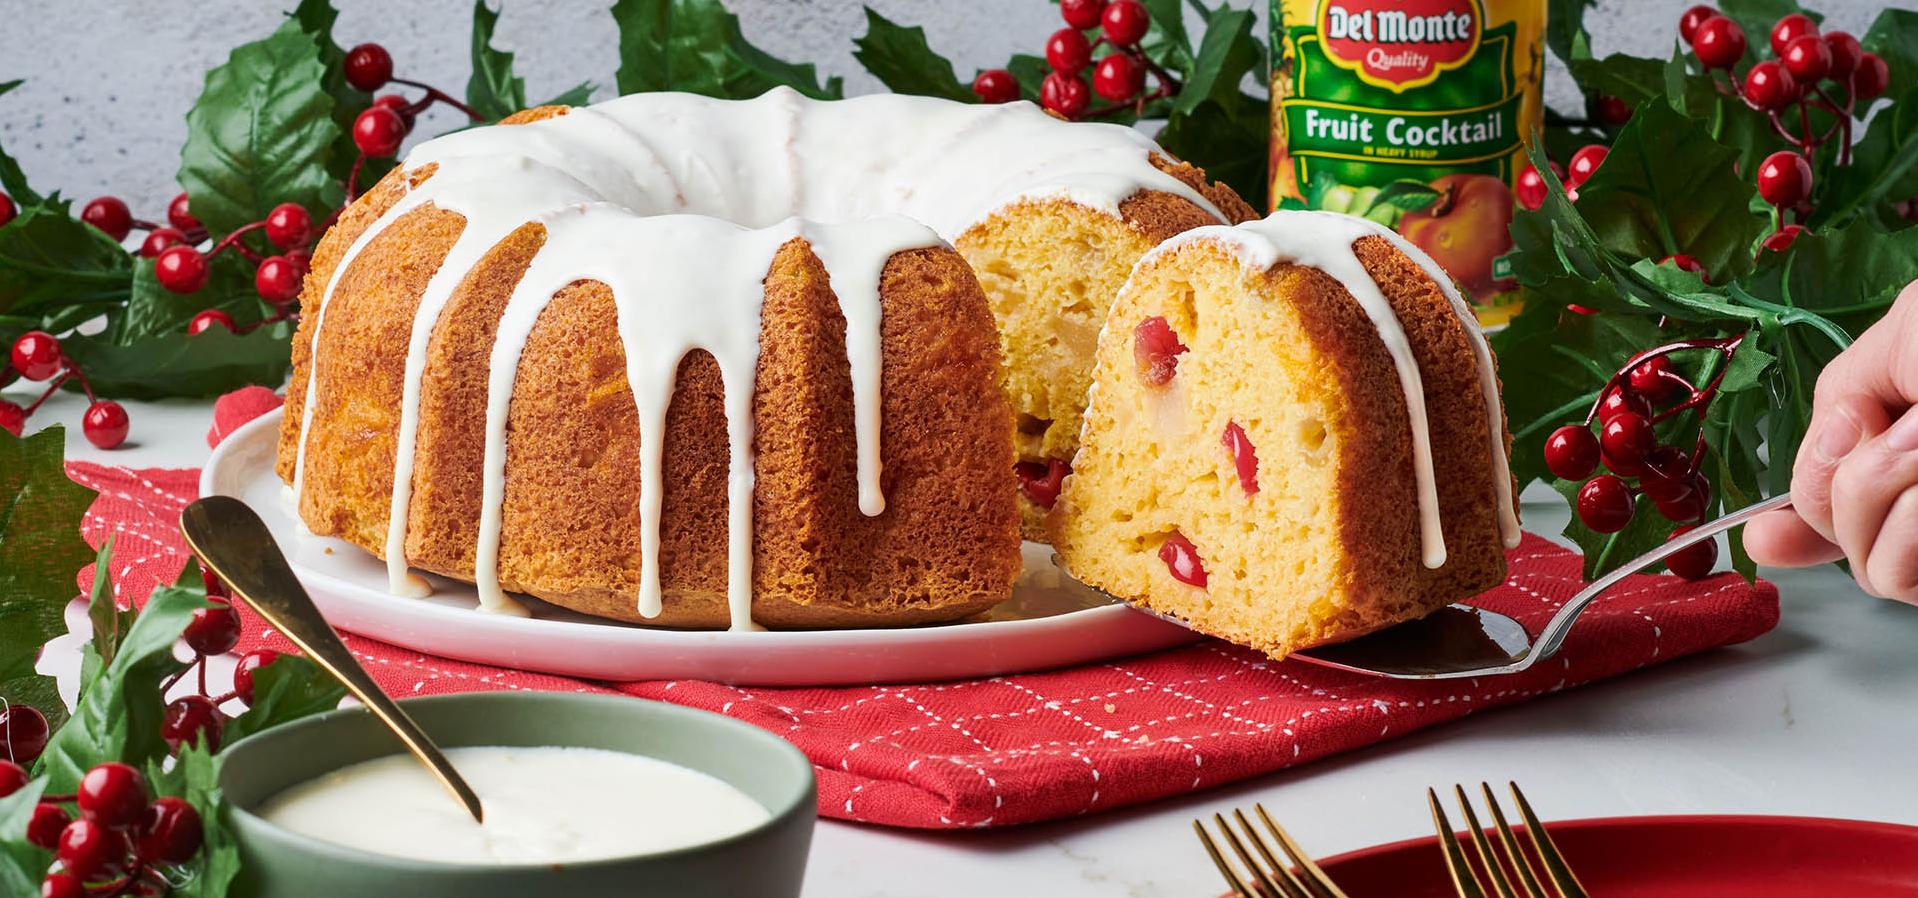  One bite of this pound cake and you'll feel like you're basking in the warm British sun ☀️